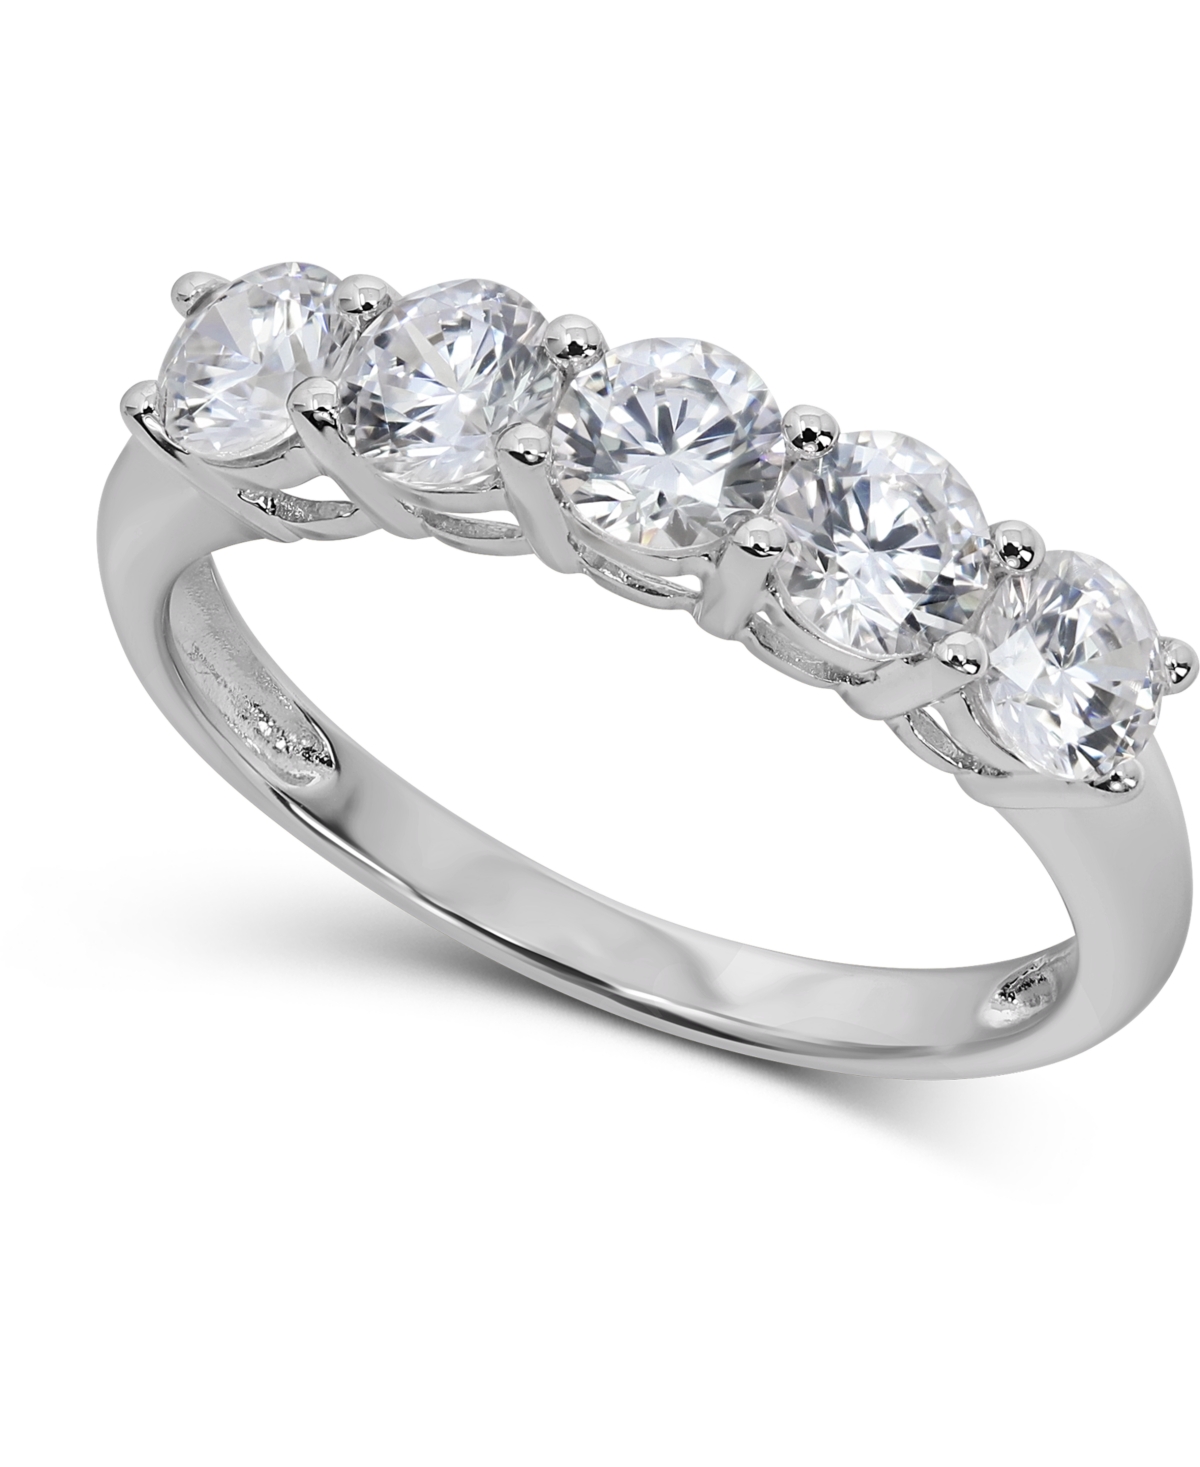 Cubic Zirconia Ring in 14k White Gold - White Gold